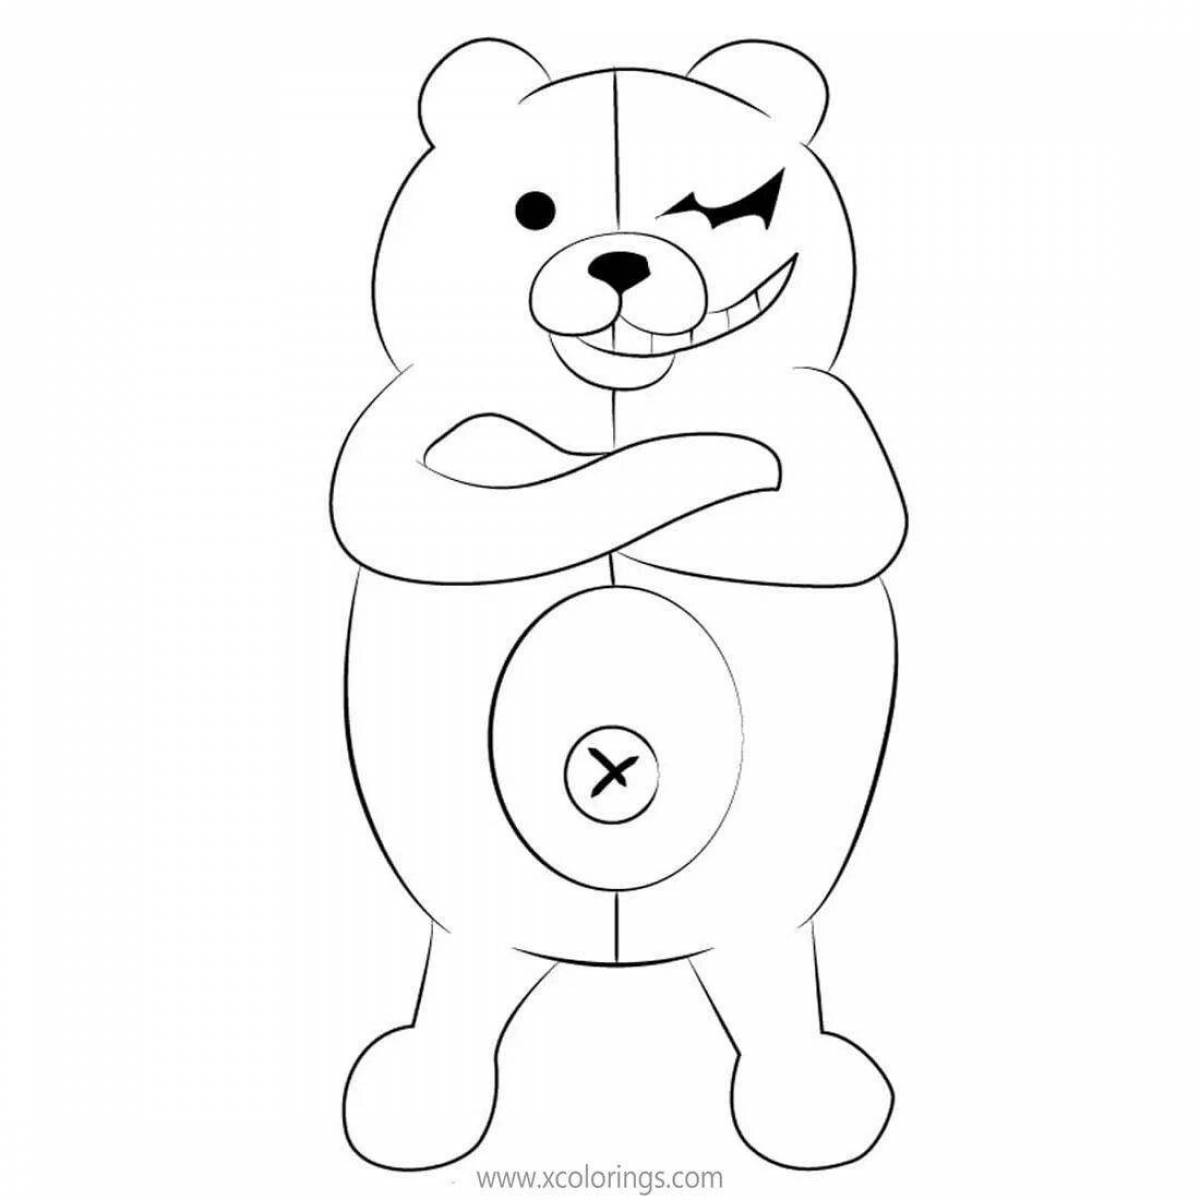 Charming bear anime coloring book